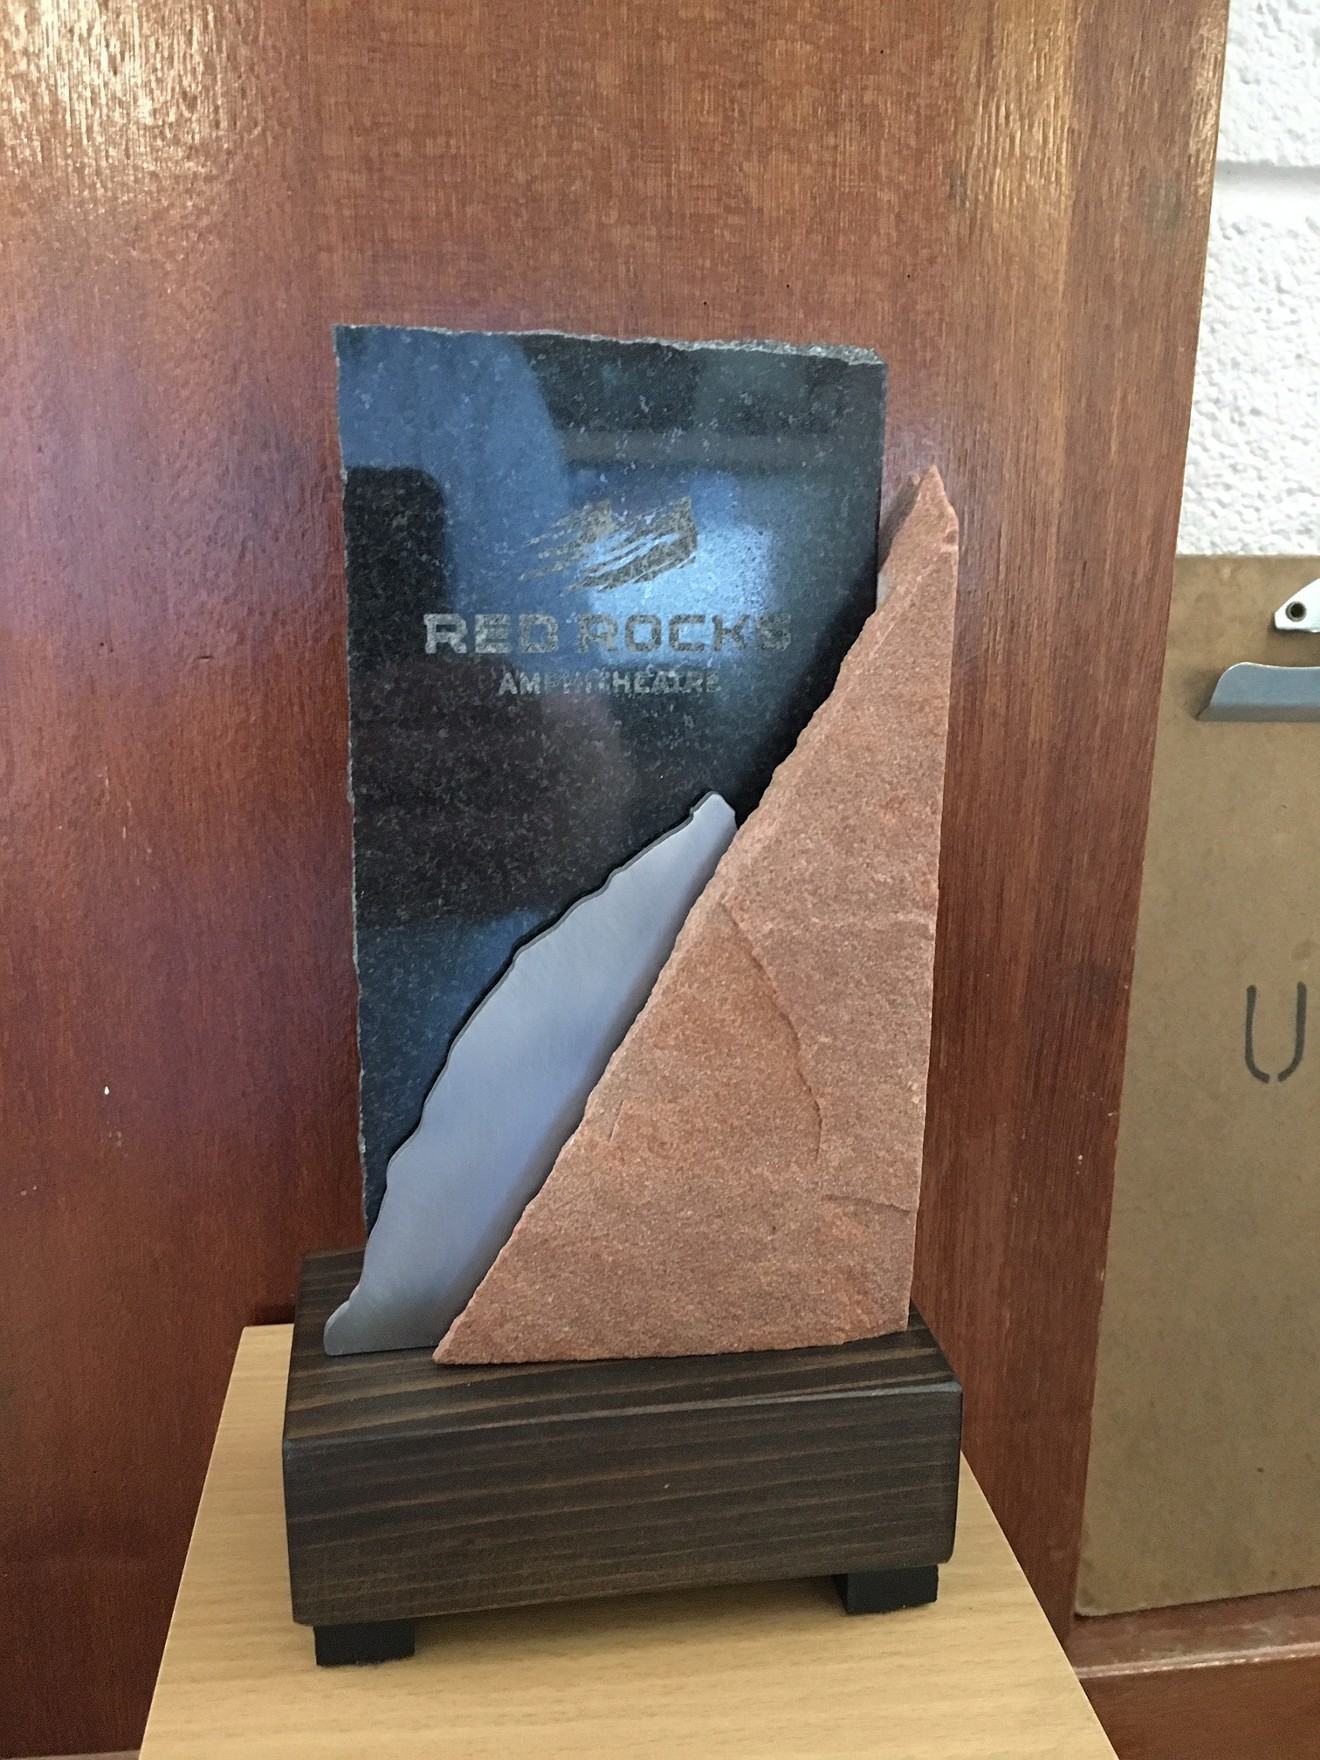 This year's Piece of the Rock award.